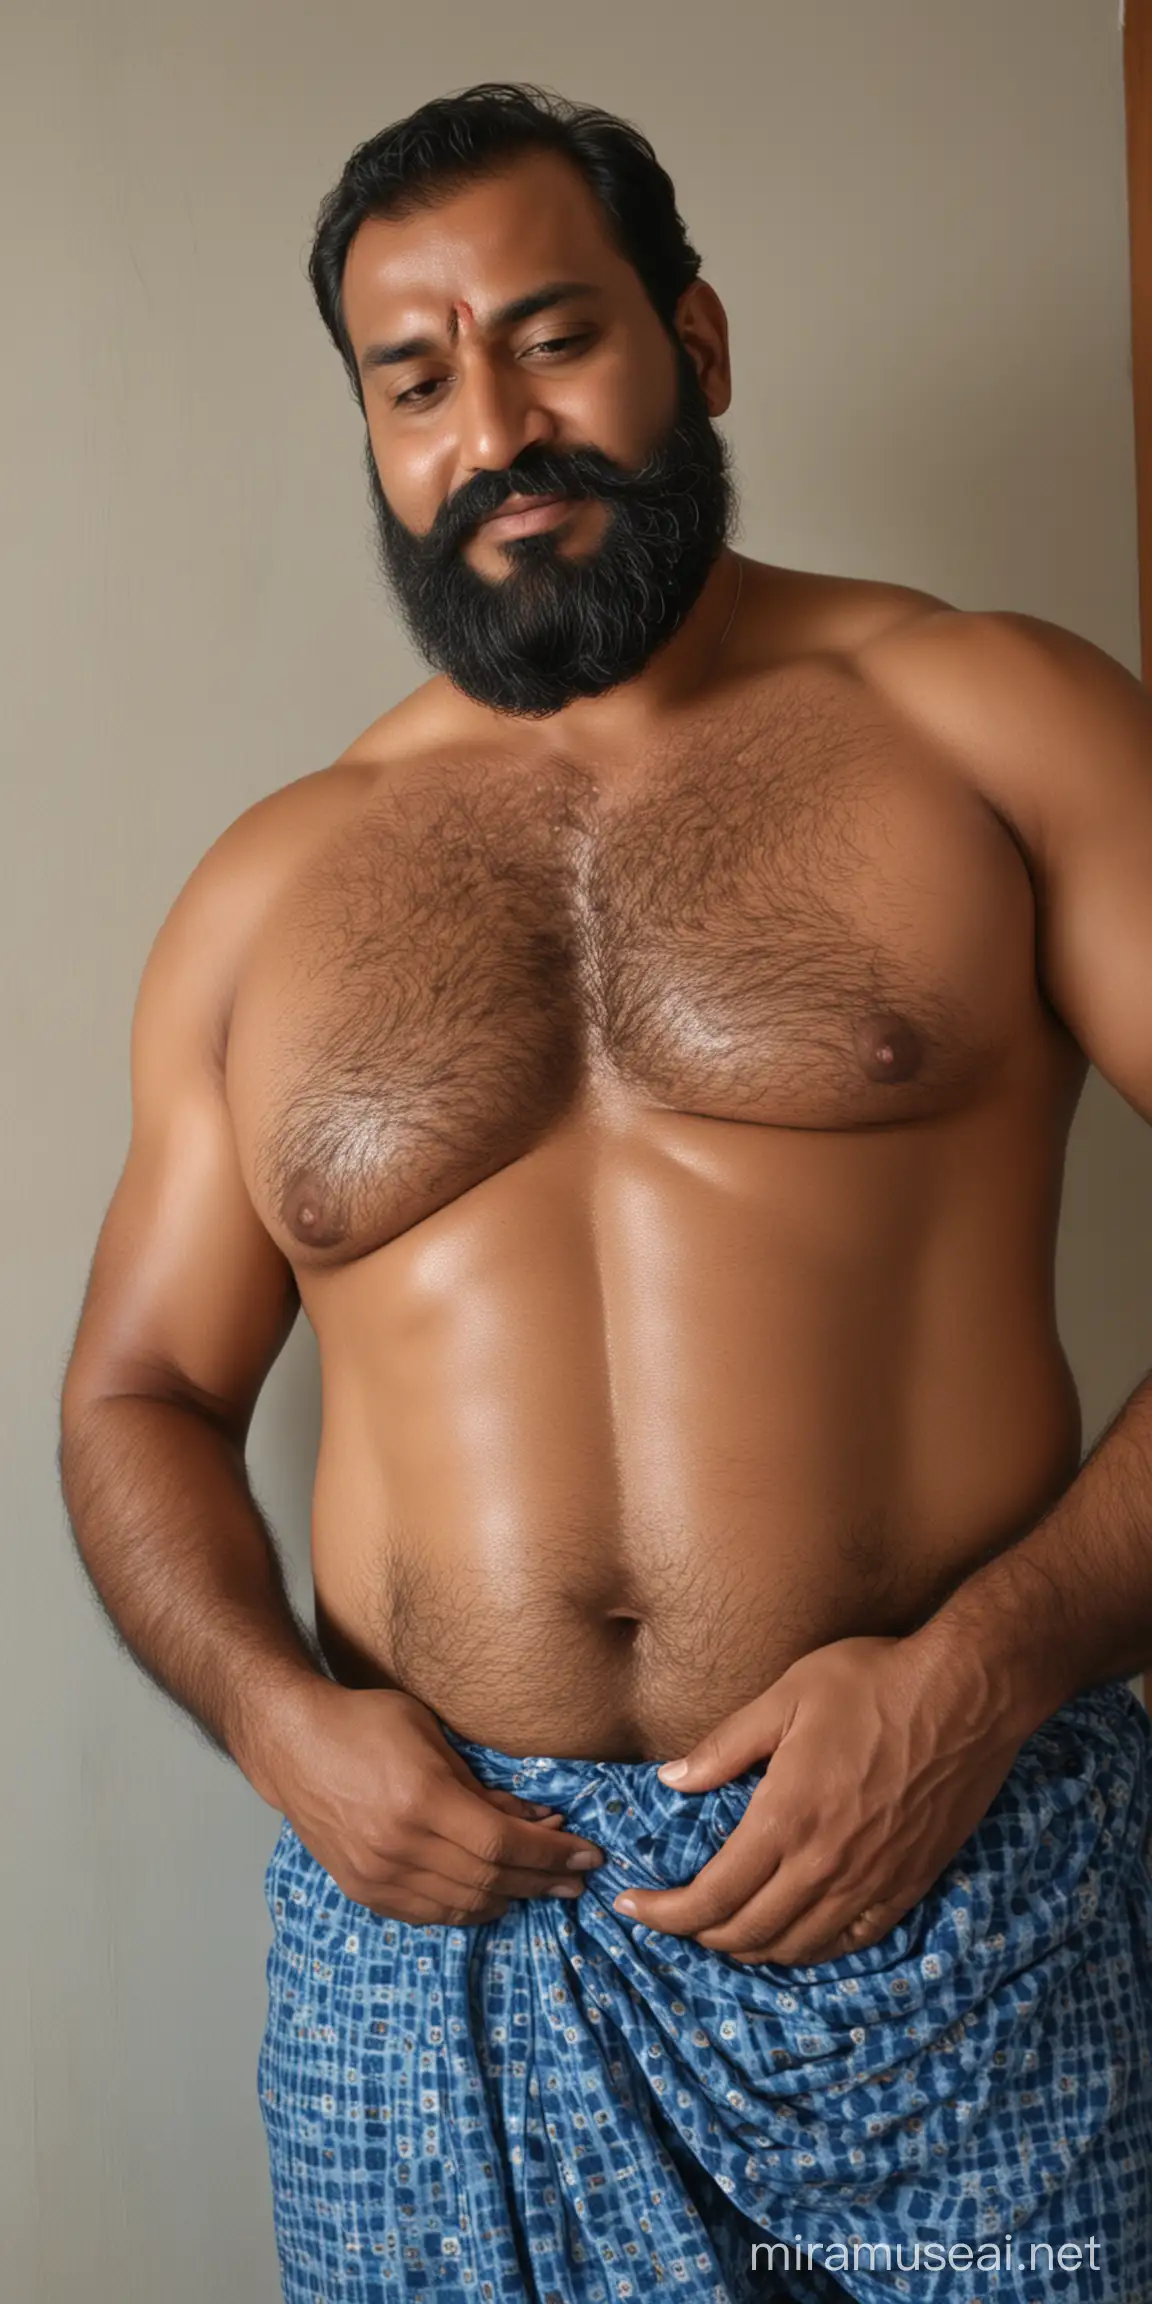 Summer midnight,Indian Handsome mature muscular beefy daddy with big fat pot belly and stunning features cuddling ,Wearing a blue lungi, entire body is drenched in midnight sweat and glistening from the light of moon from the big window in the room. His body is hairy and has a hairy chest and full beard. The sight is truly mesmerizing as they looks stunning even in his sleep